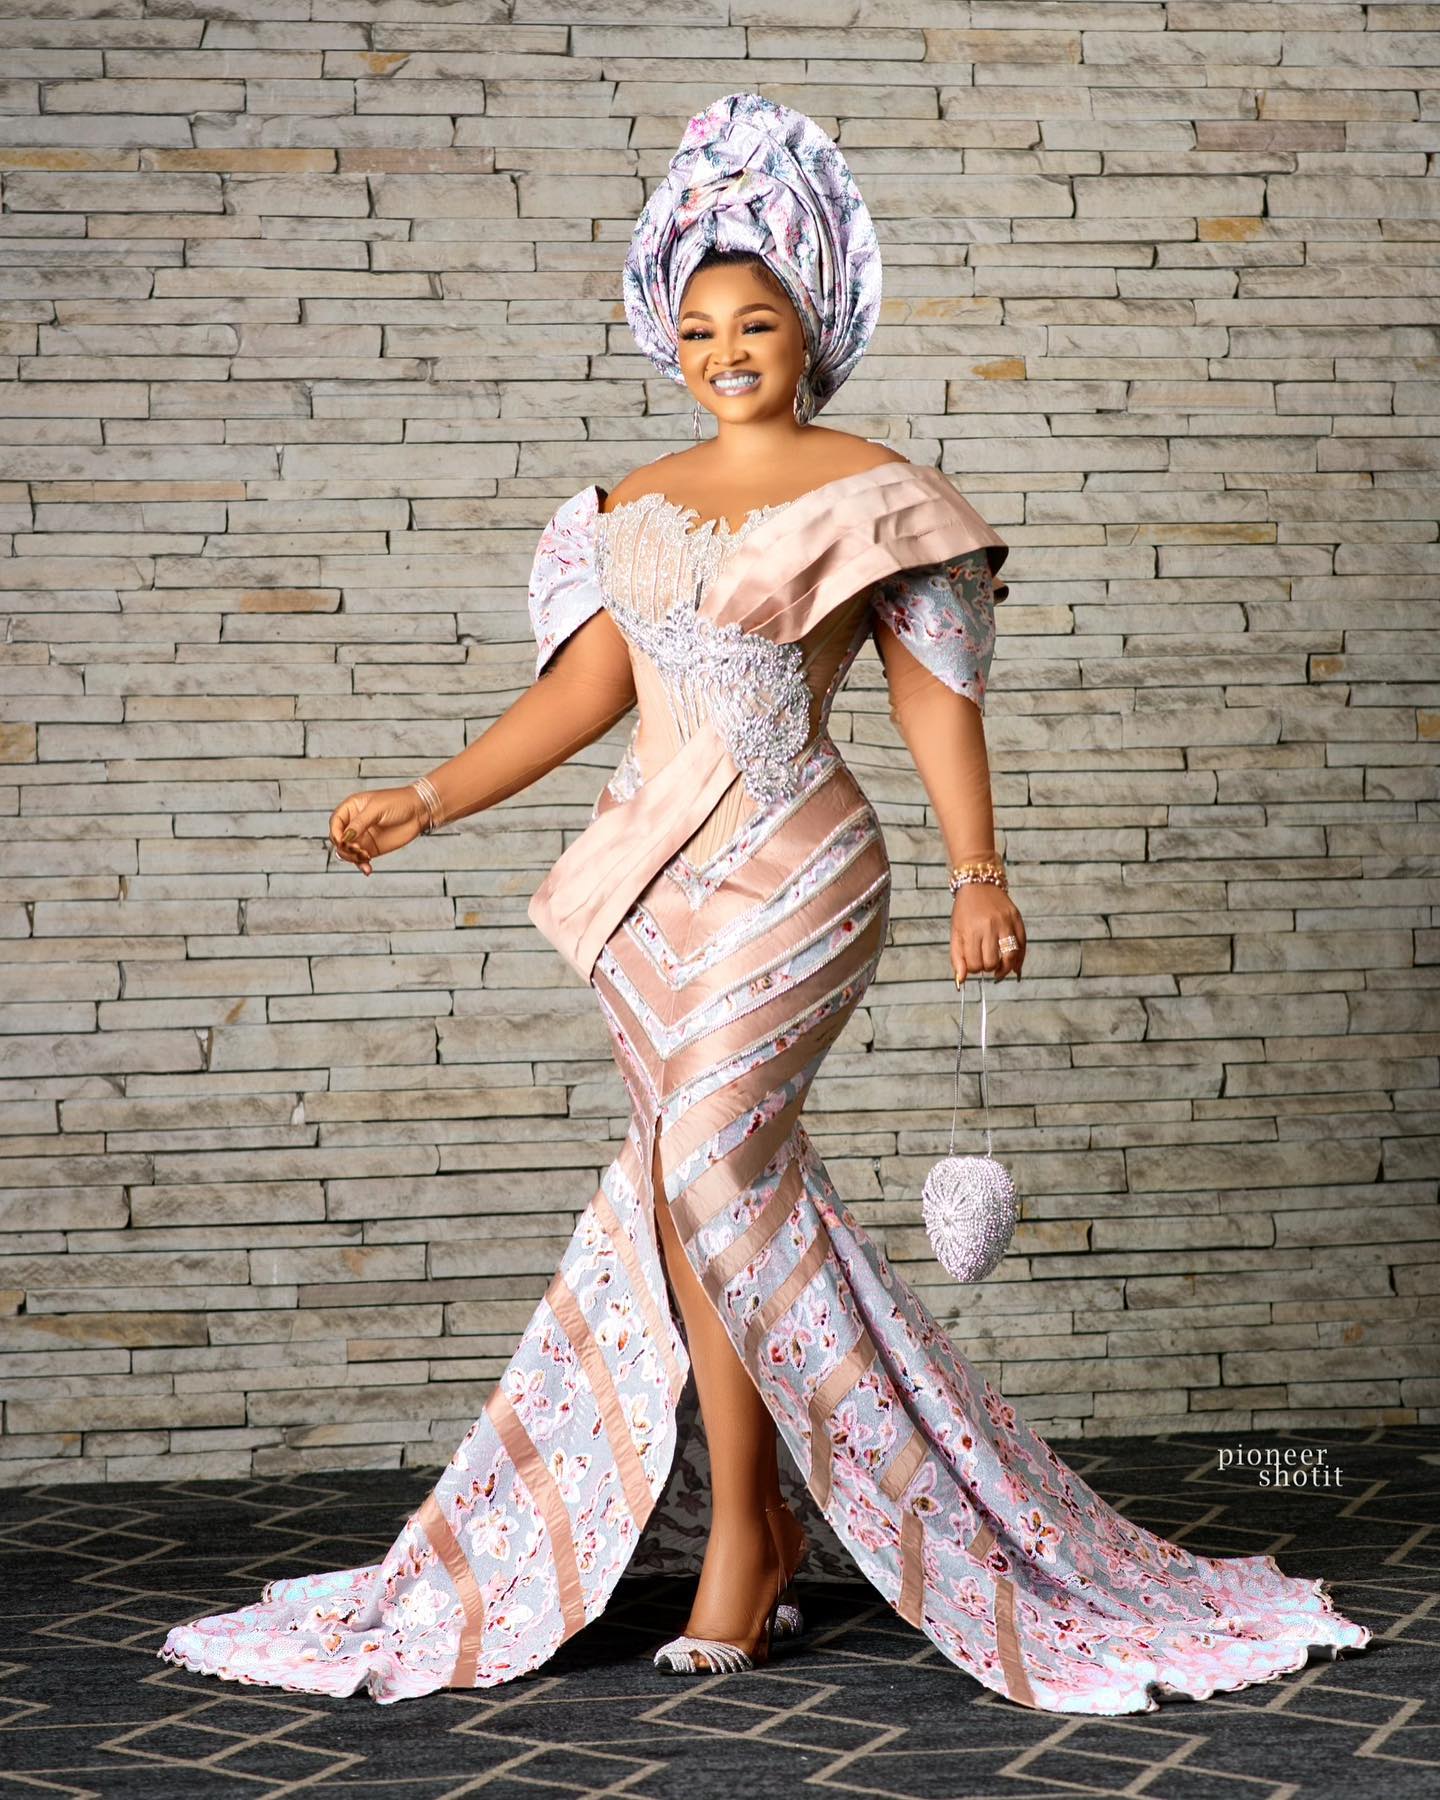 Mercy Aigbe- Rocking Just The Owambe Look The Season Needs